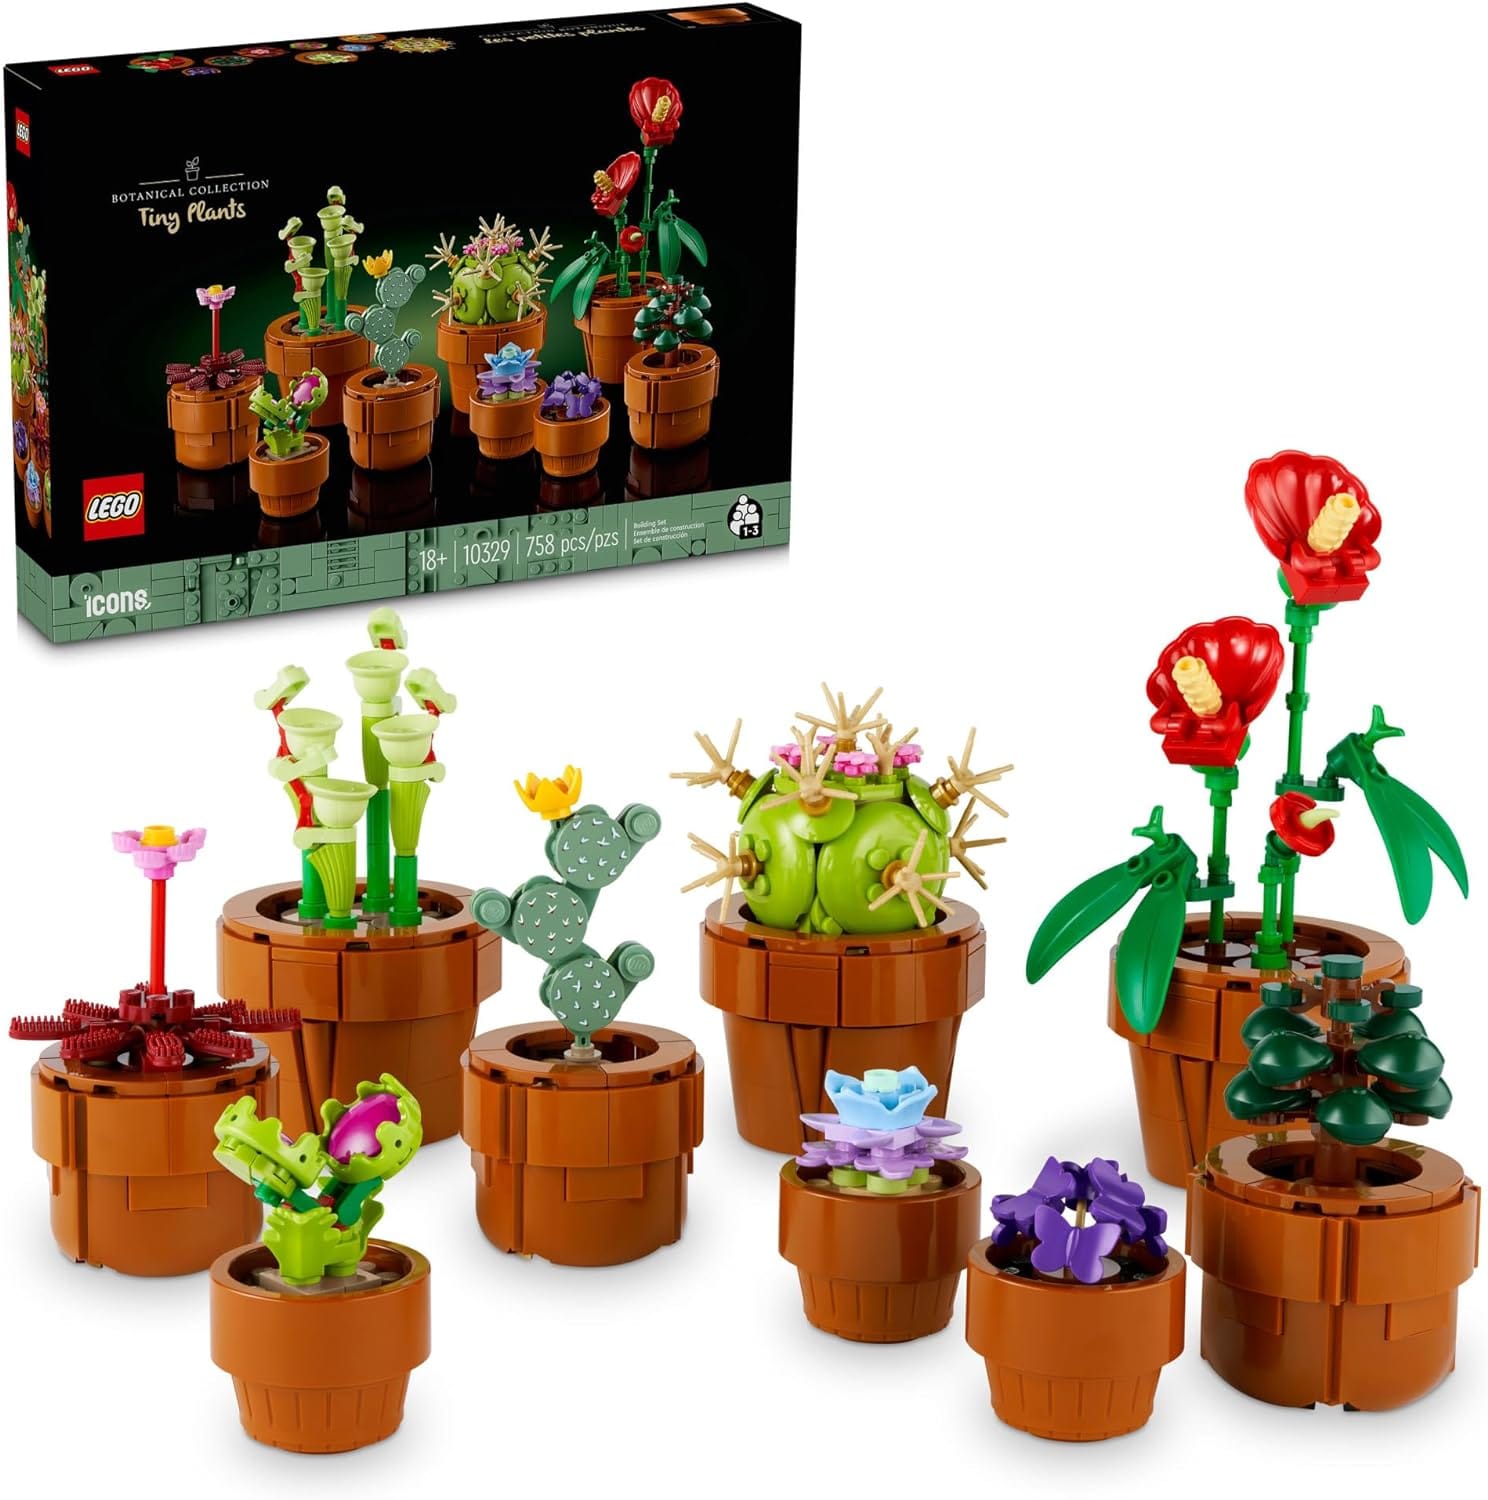 LEGO Icons Tiny Plants Building Set Review